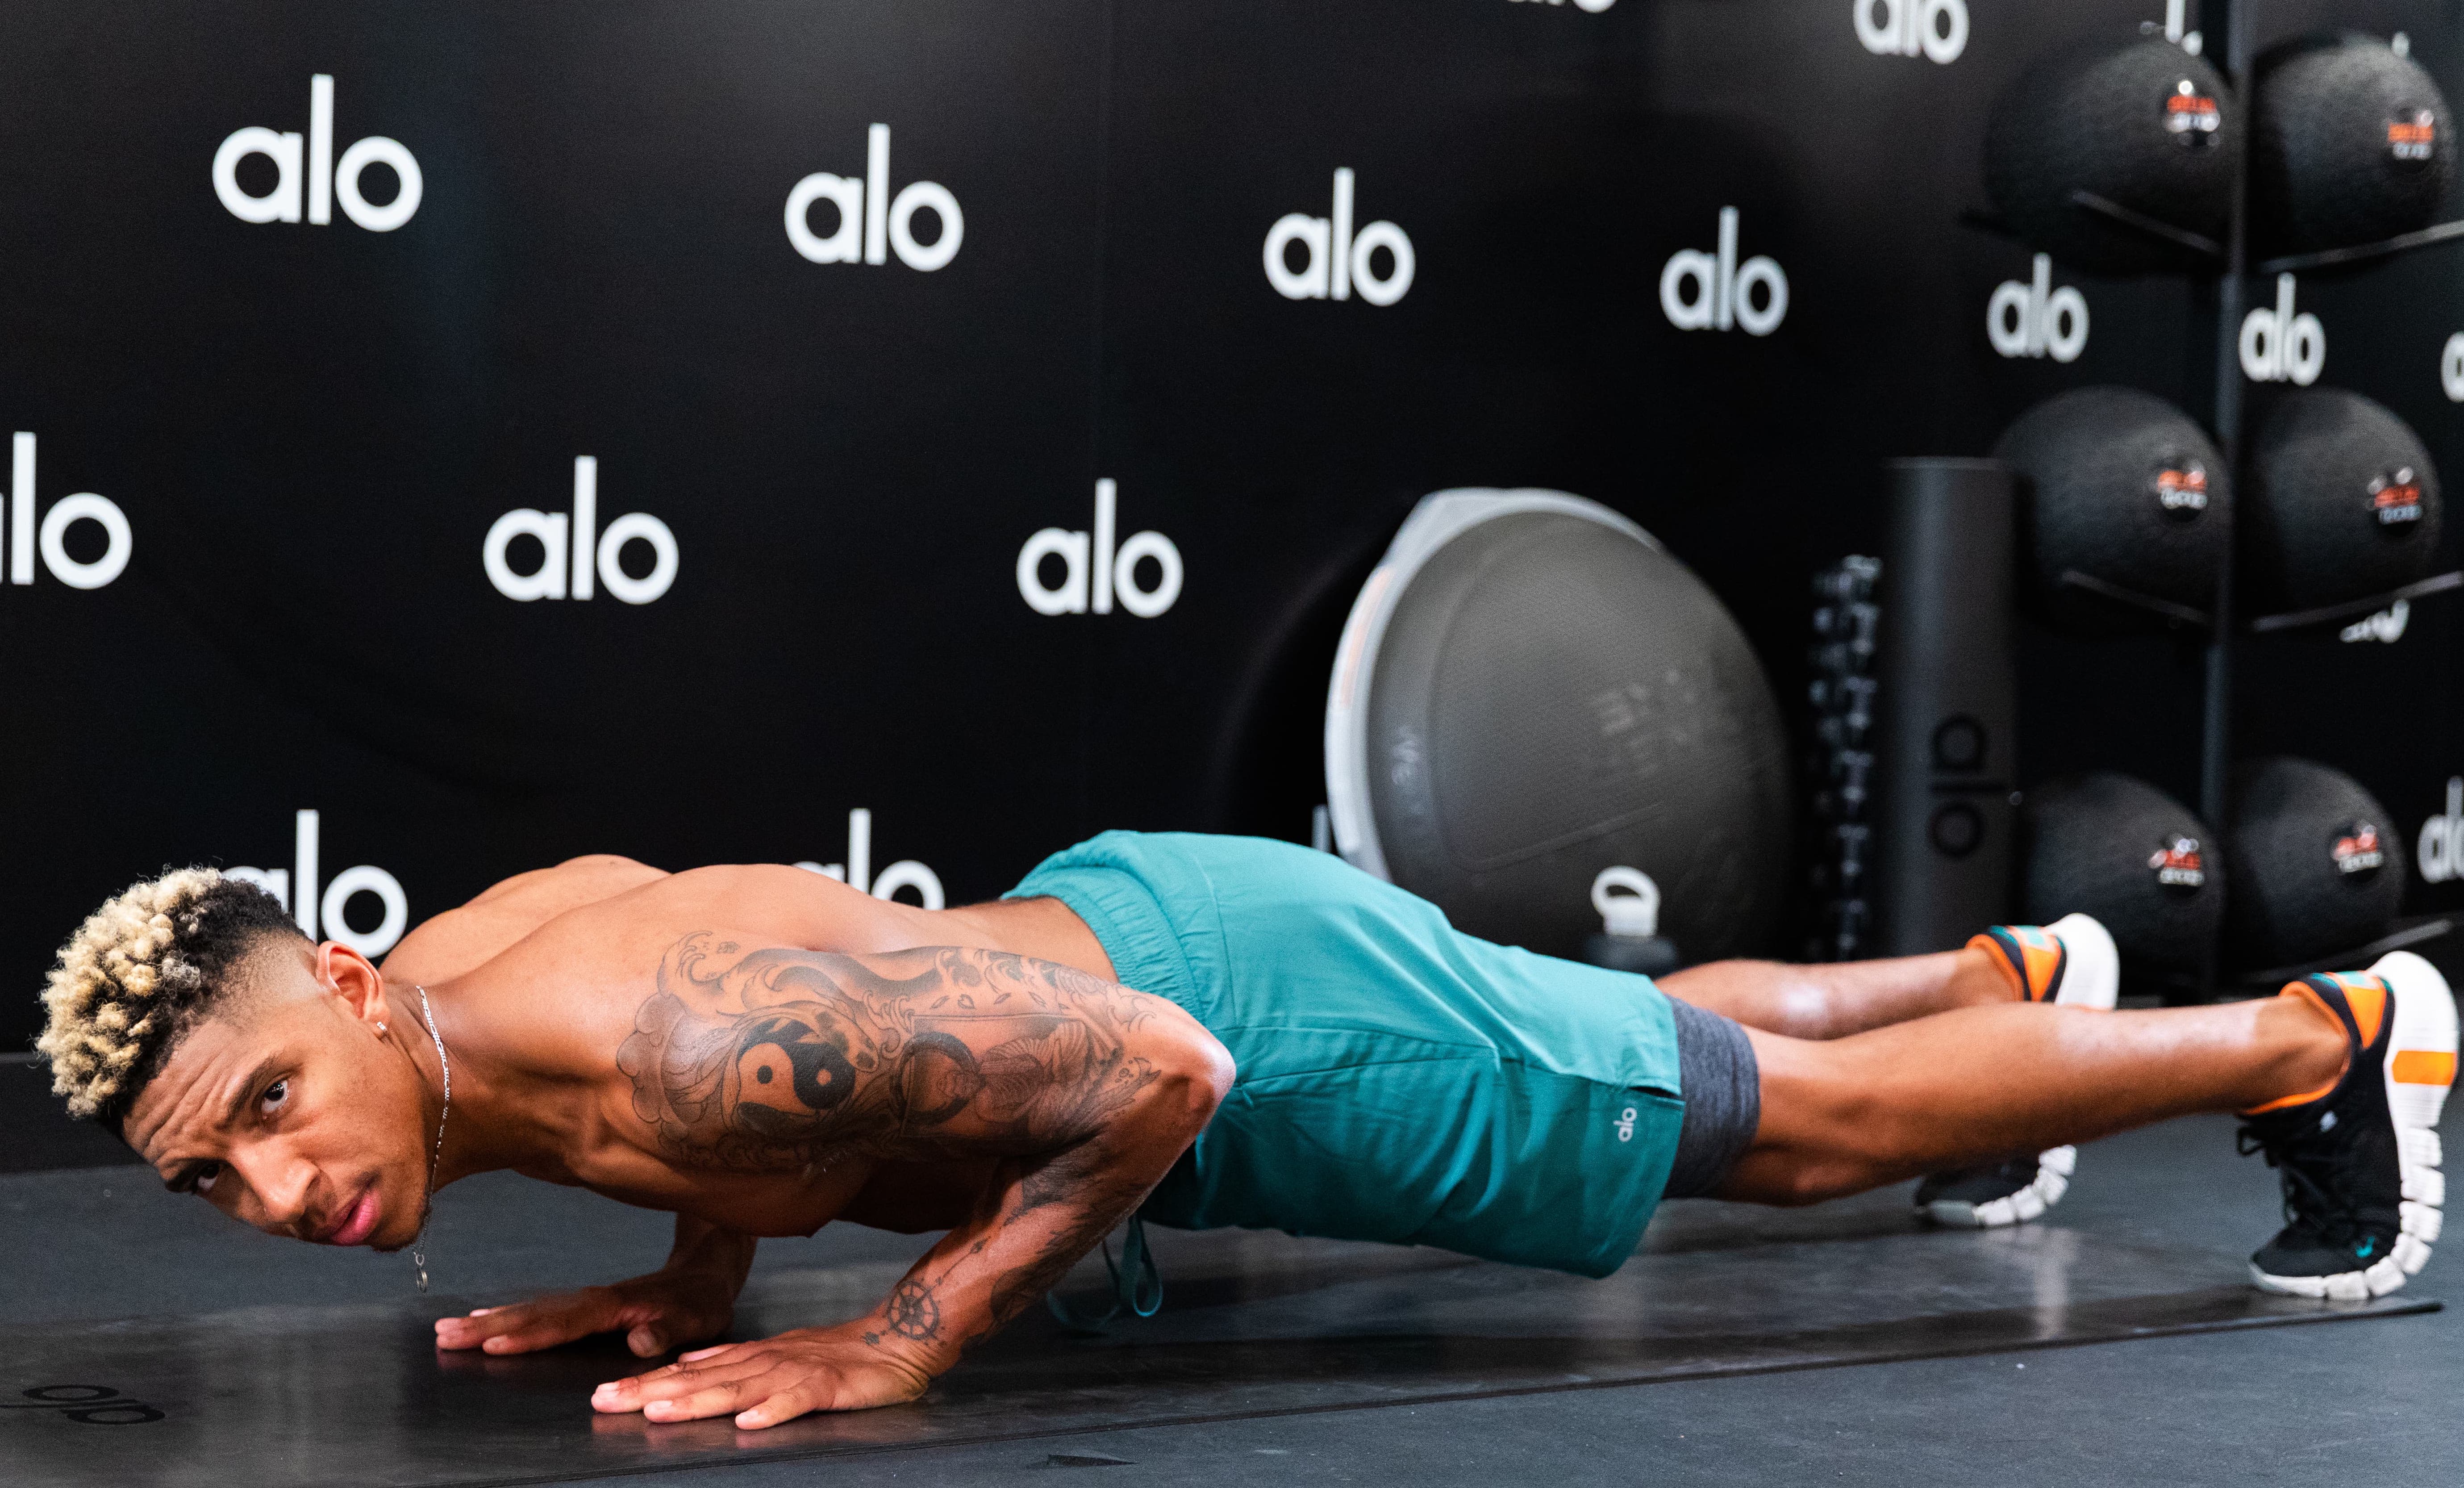 Louis Chandler in a pushup position while wearing a pair of men's teal activewear shorts within Alo's Wellness Club filming for his newest classes on Alo Moves.